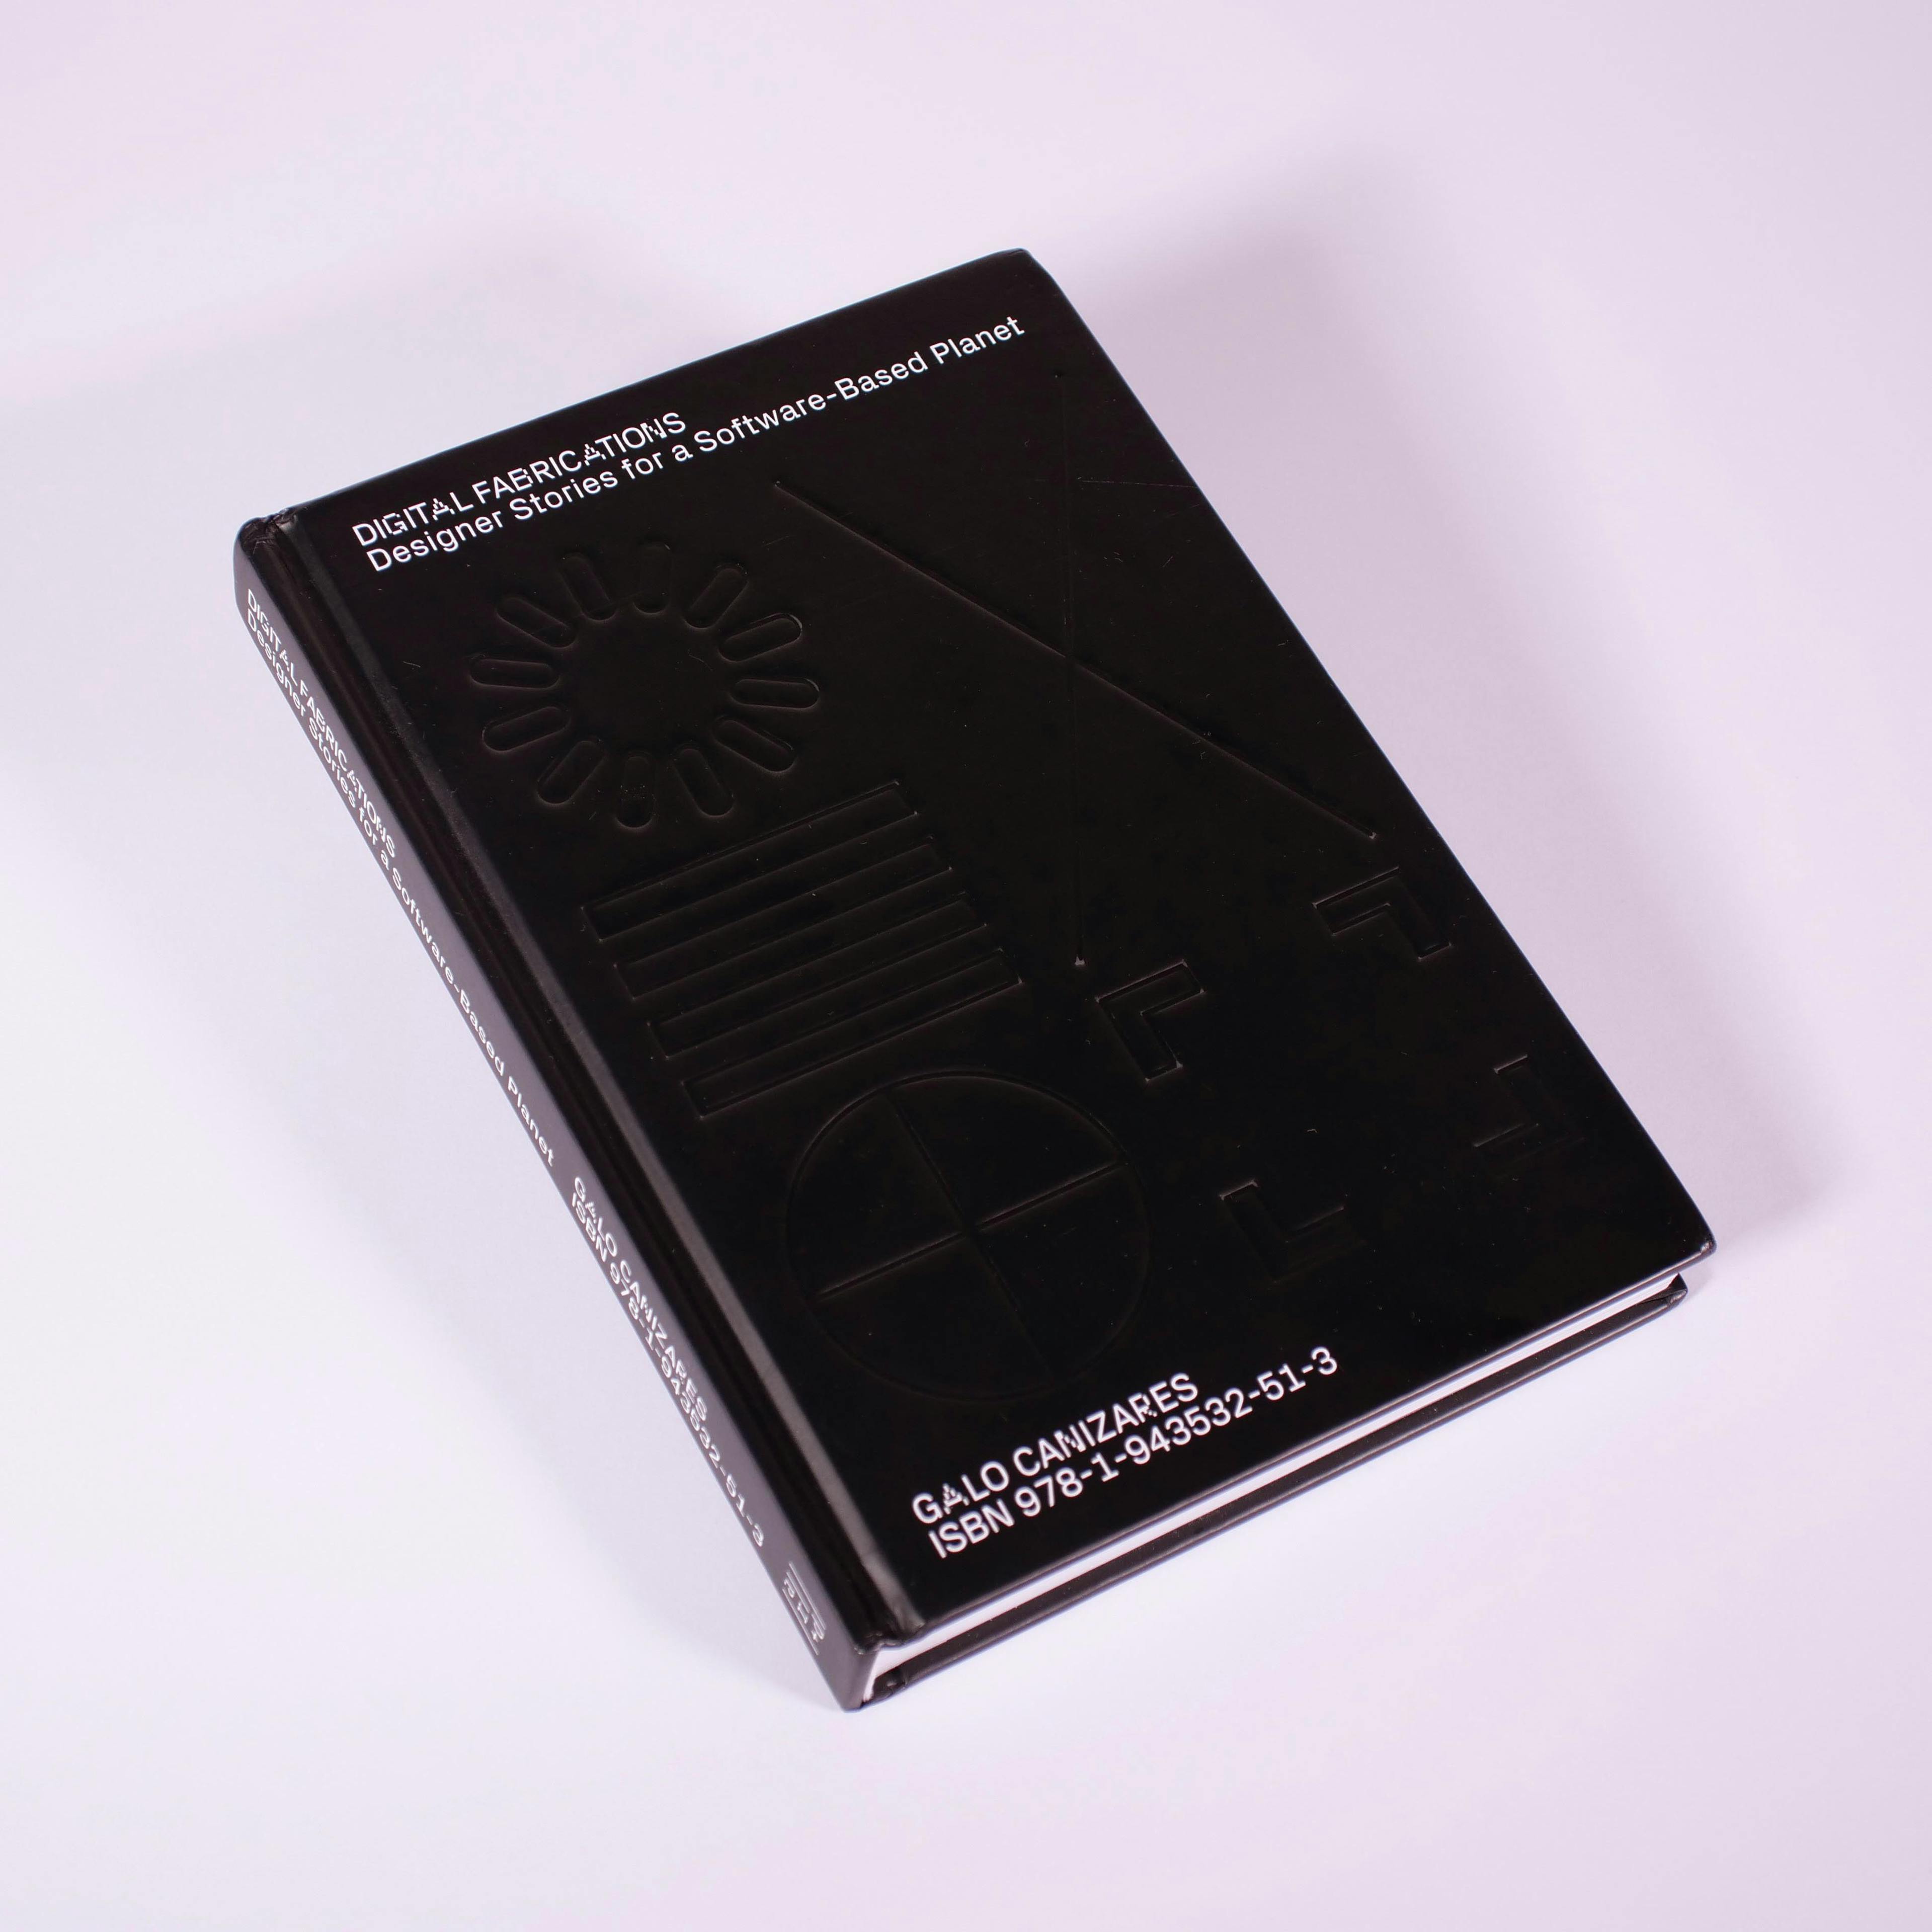 A collection of essays and stories on software and design.